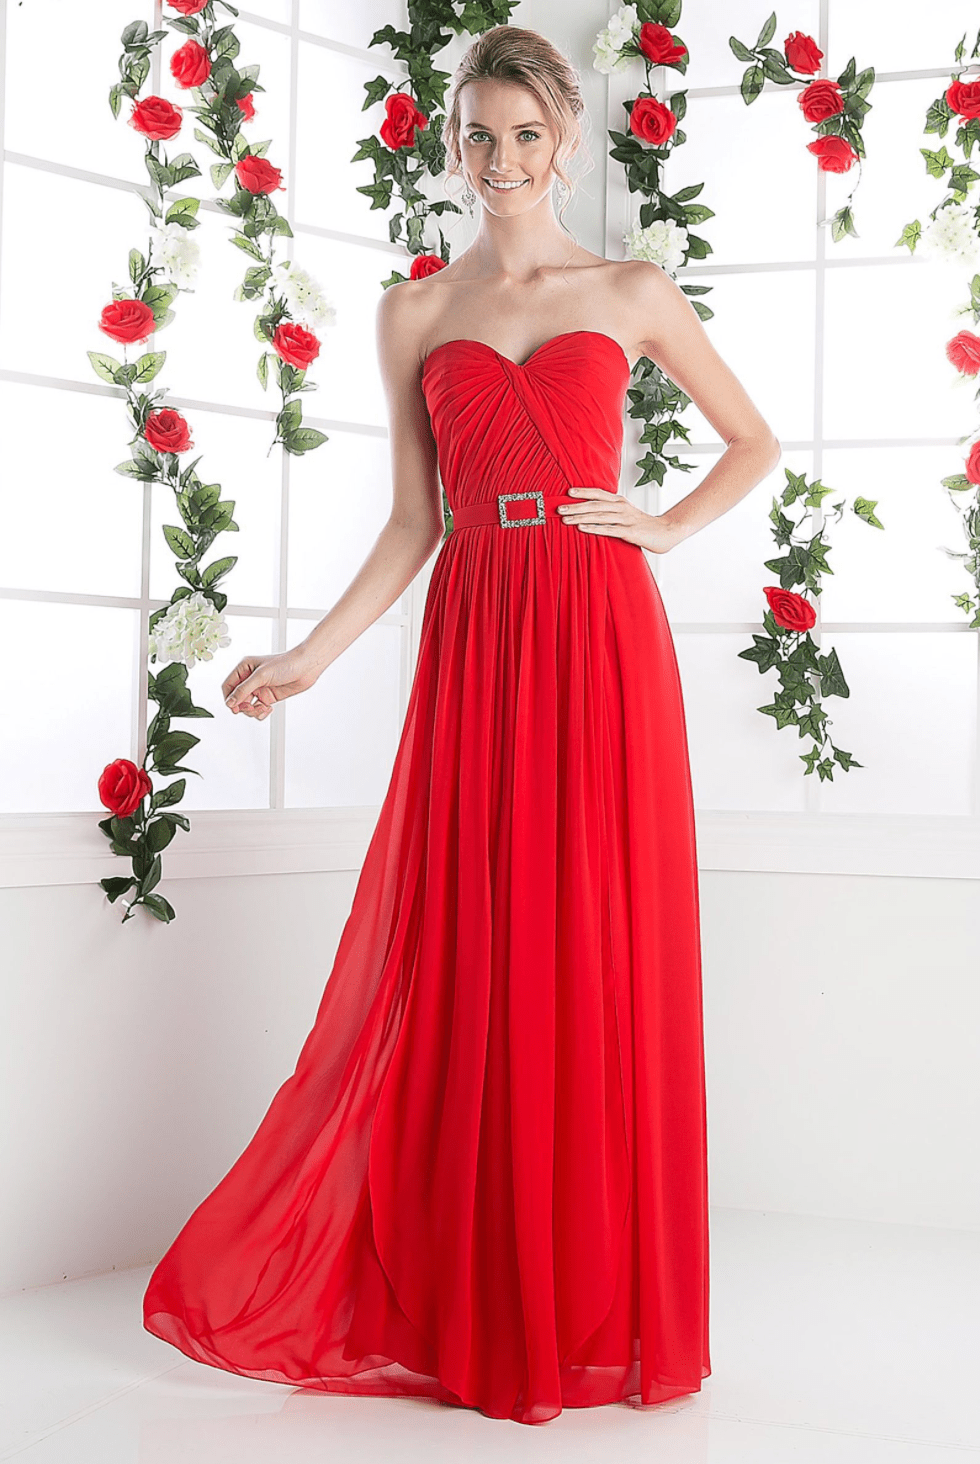 Strapless Pleated Flowing Chiffon Dress by Cinderella Divine - NORMA REED